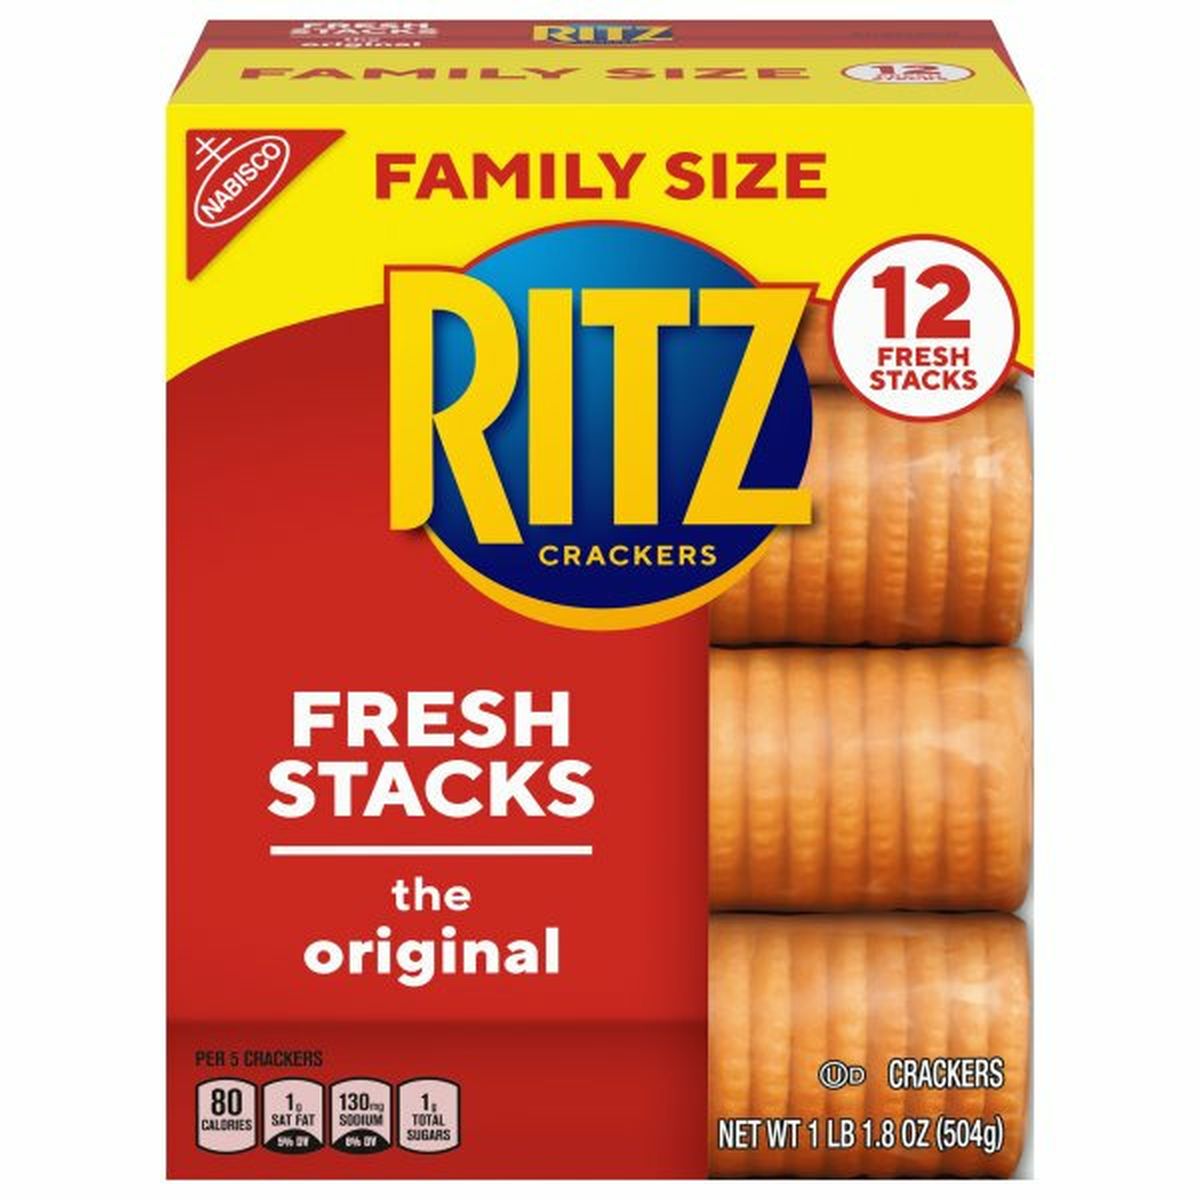 Calories in Ritz Crackers, The Original, 12 Fresh Stacks, Family Size